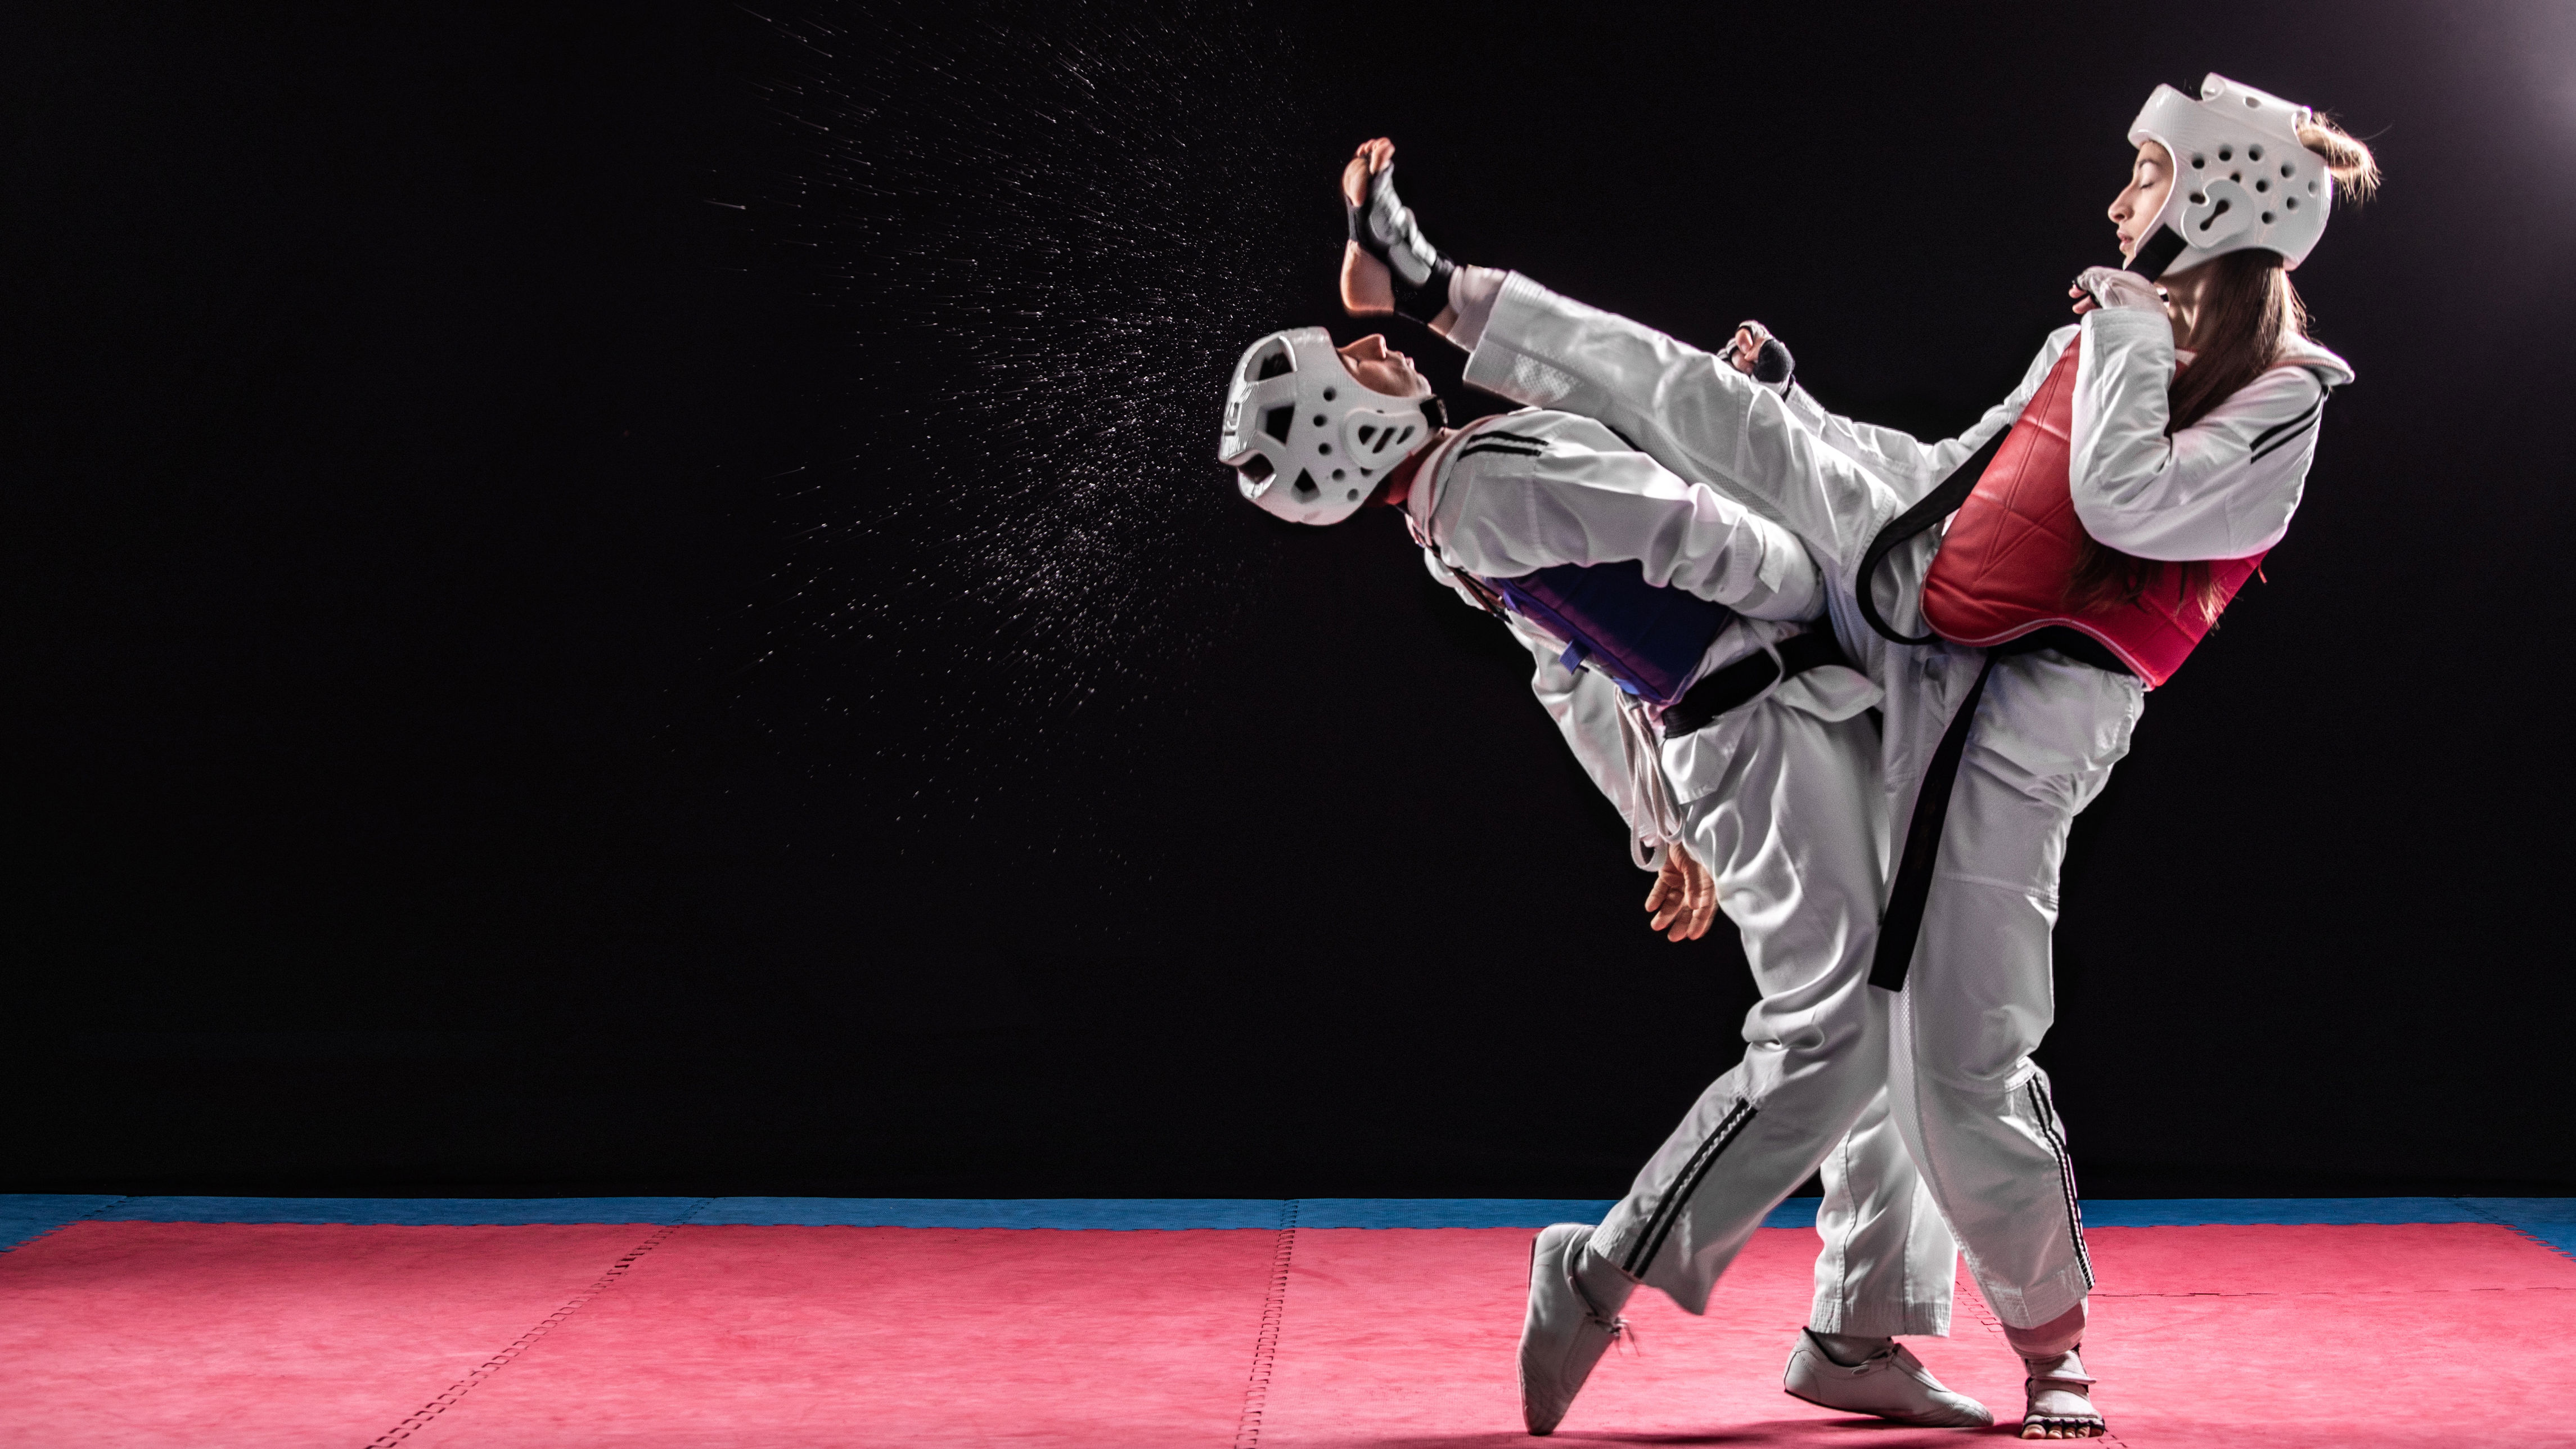 i took up martial arts in my 40s, and it totally changed my approach to fitness